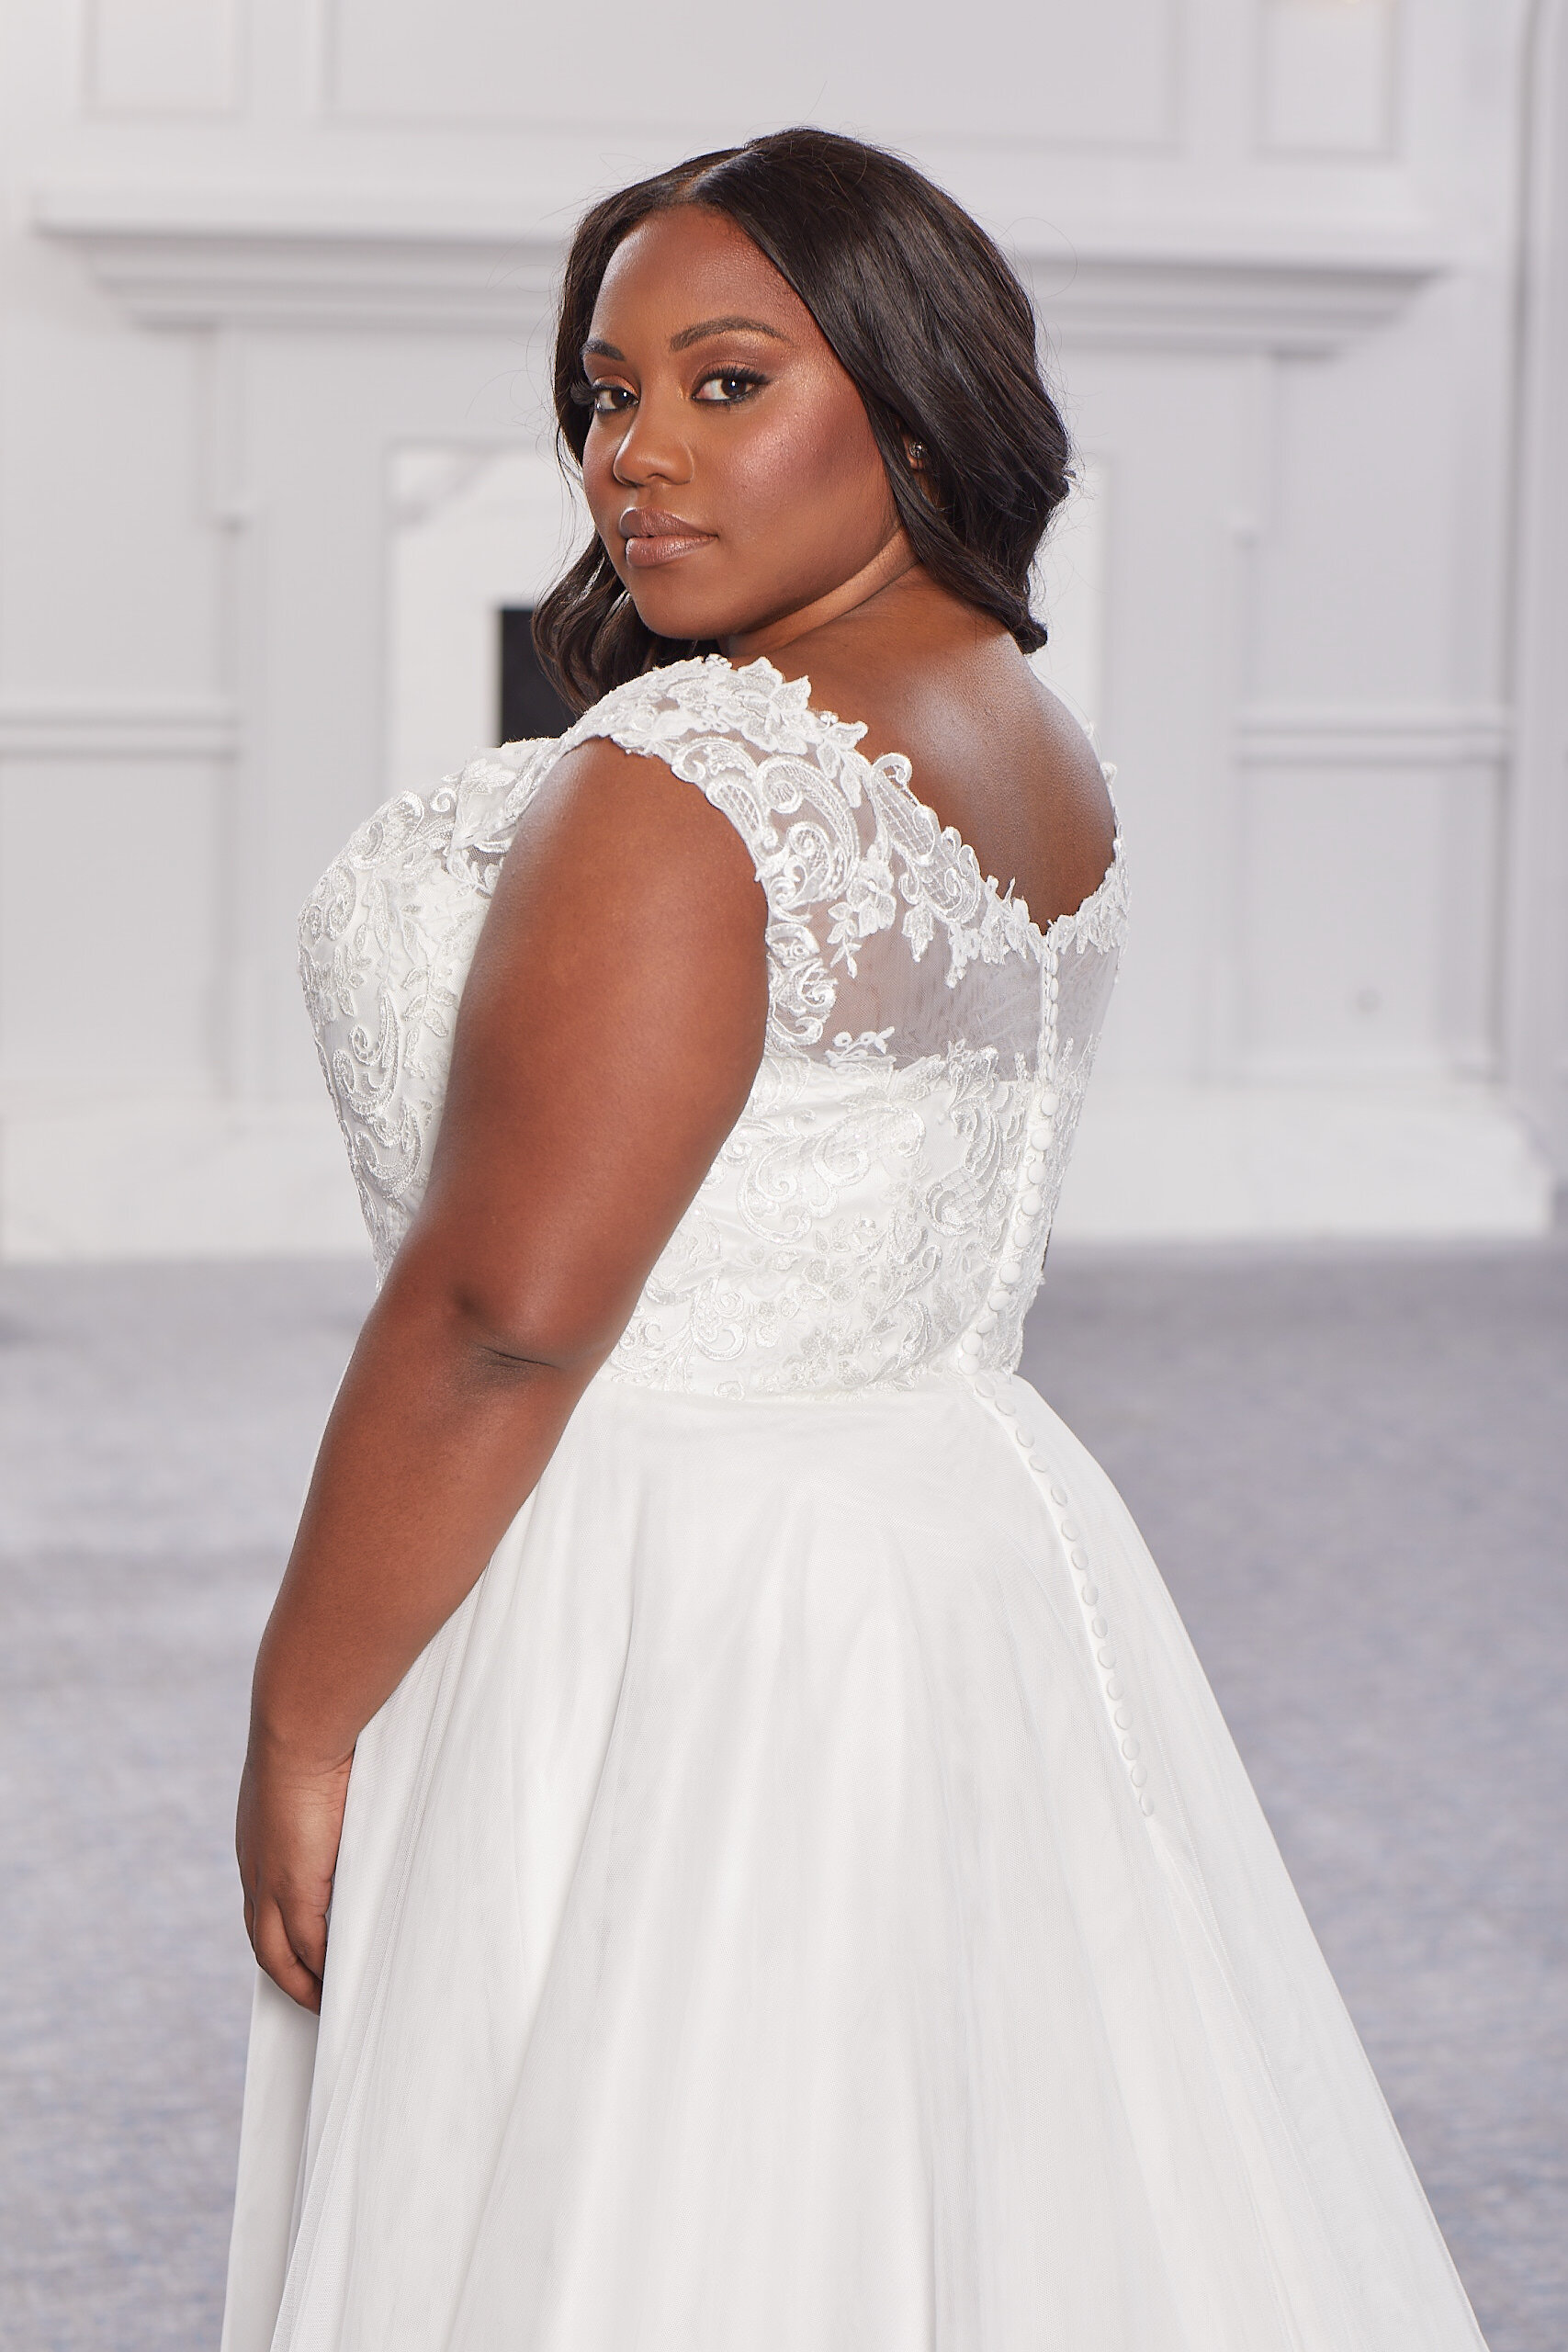 Brides-by-Young-Plus-Size-Bridal-Curvy-Wedding-Dress-New-Jersey-Indiana-Chicago-Illinois-ARIEL_1742.jpg